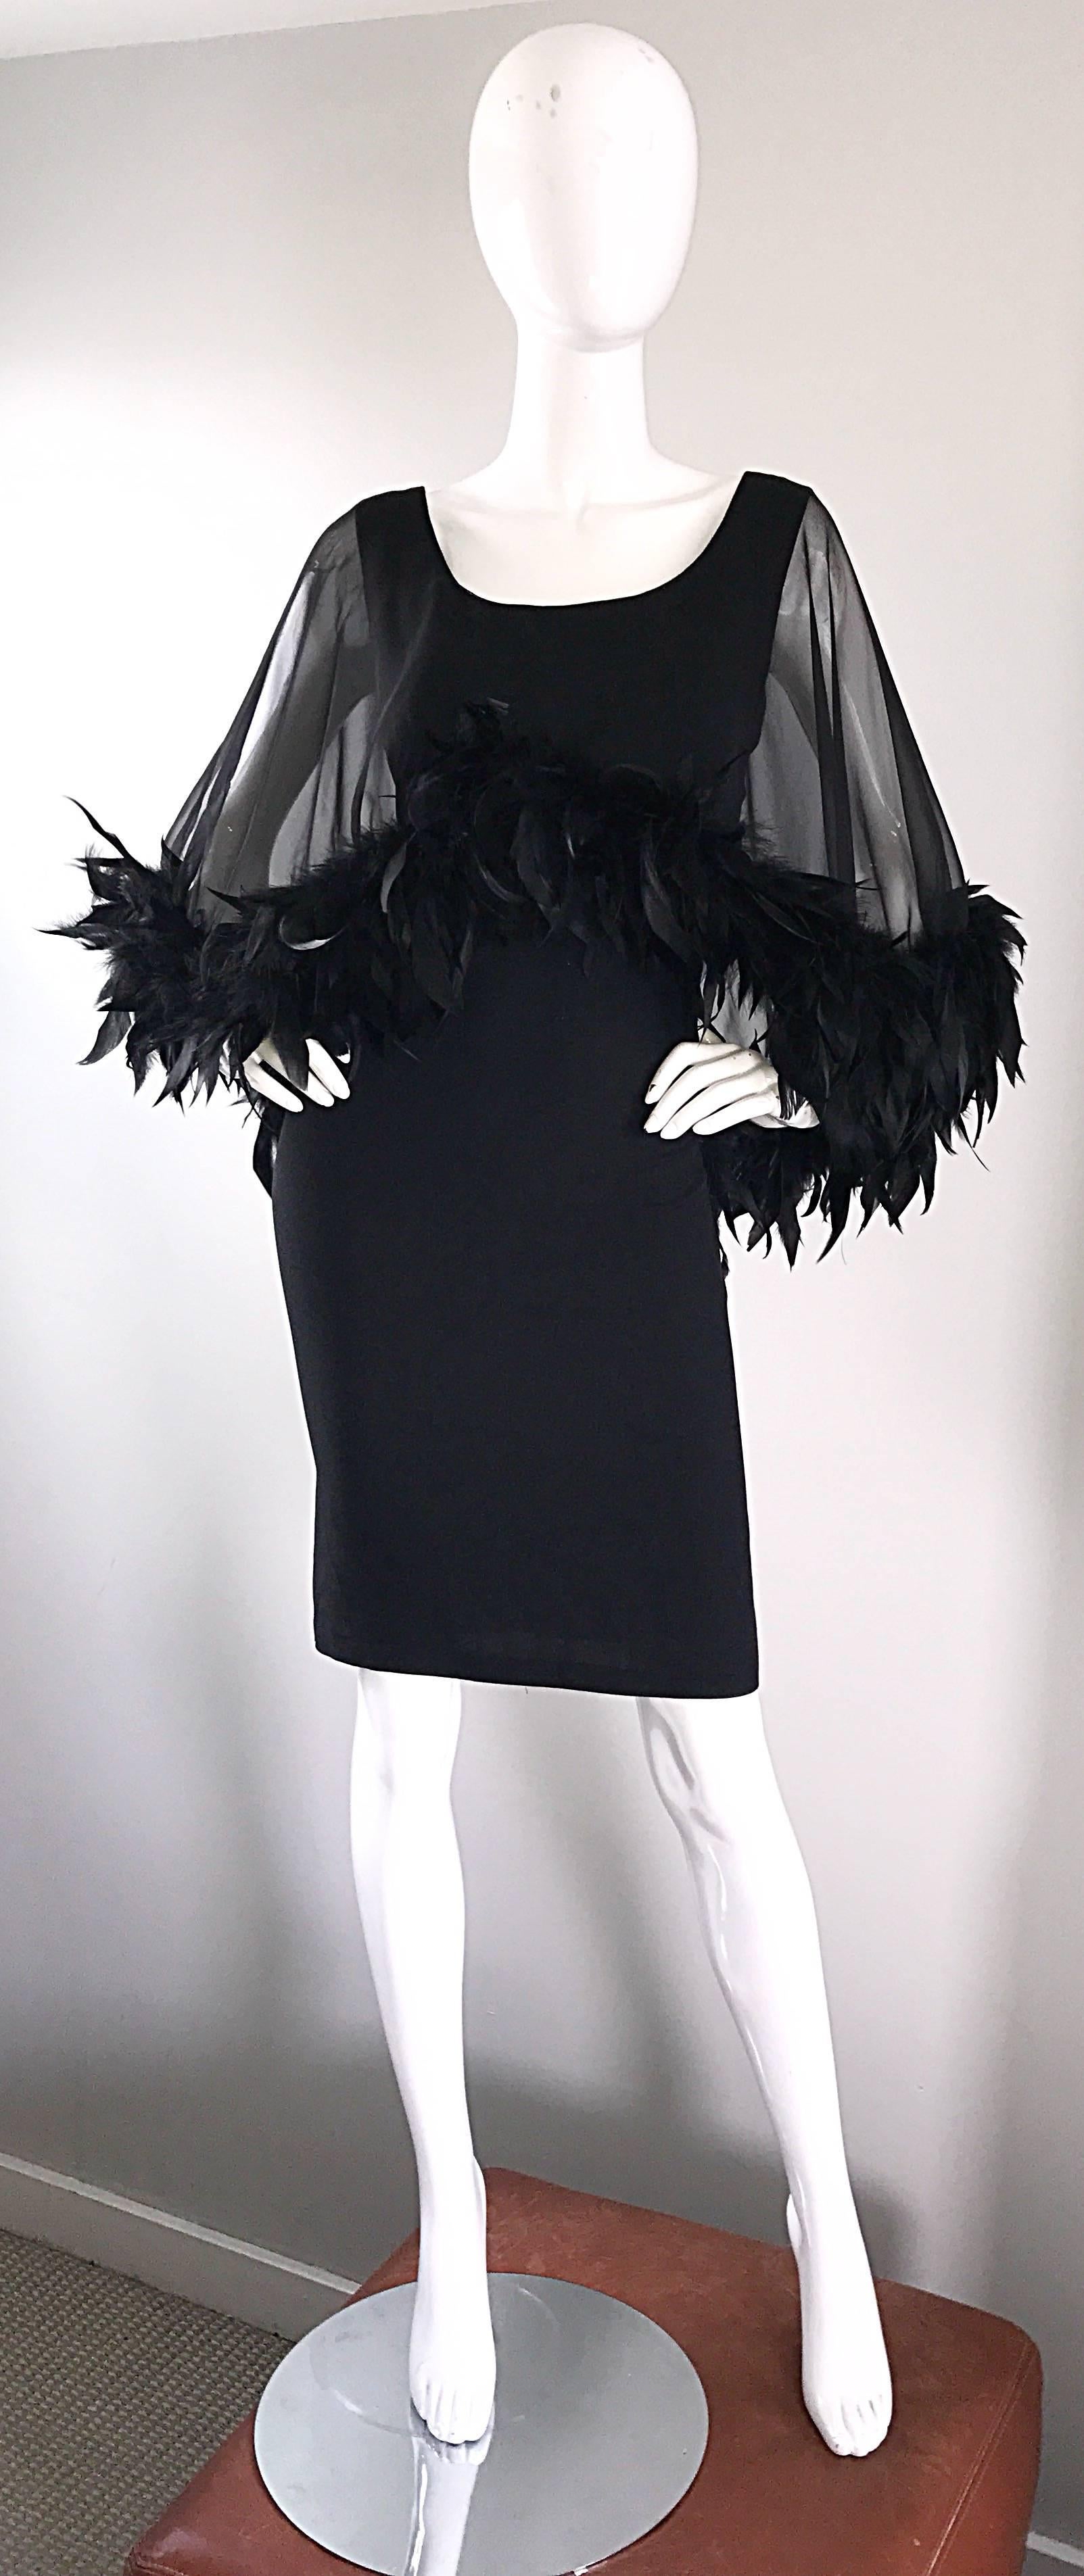 Insanely gorgeous 1950s demi couture black dress, with an attached feather trimmed sheer chiffon overlay. Wonderful flattering form fitting fit looks incredible on the body! So much h attention to detail, with the majority of the craftsmanship